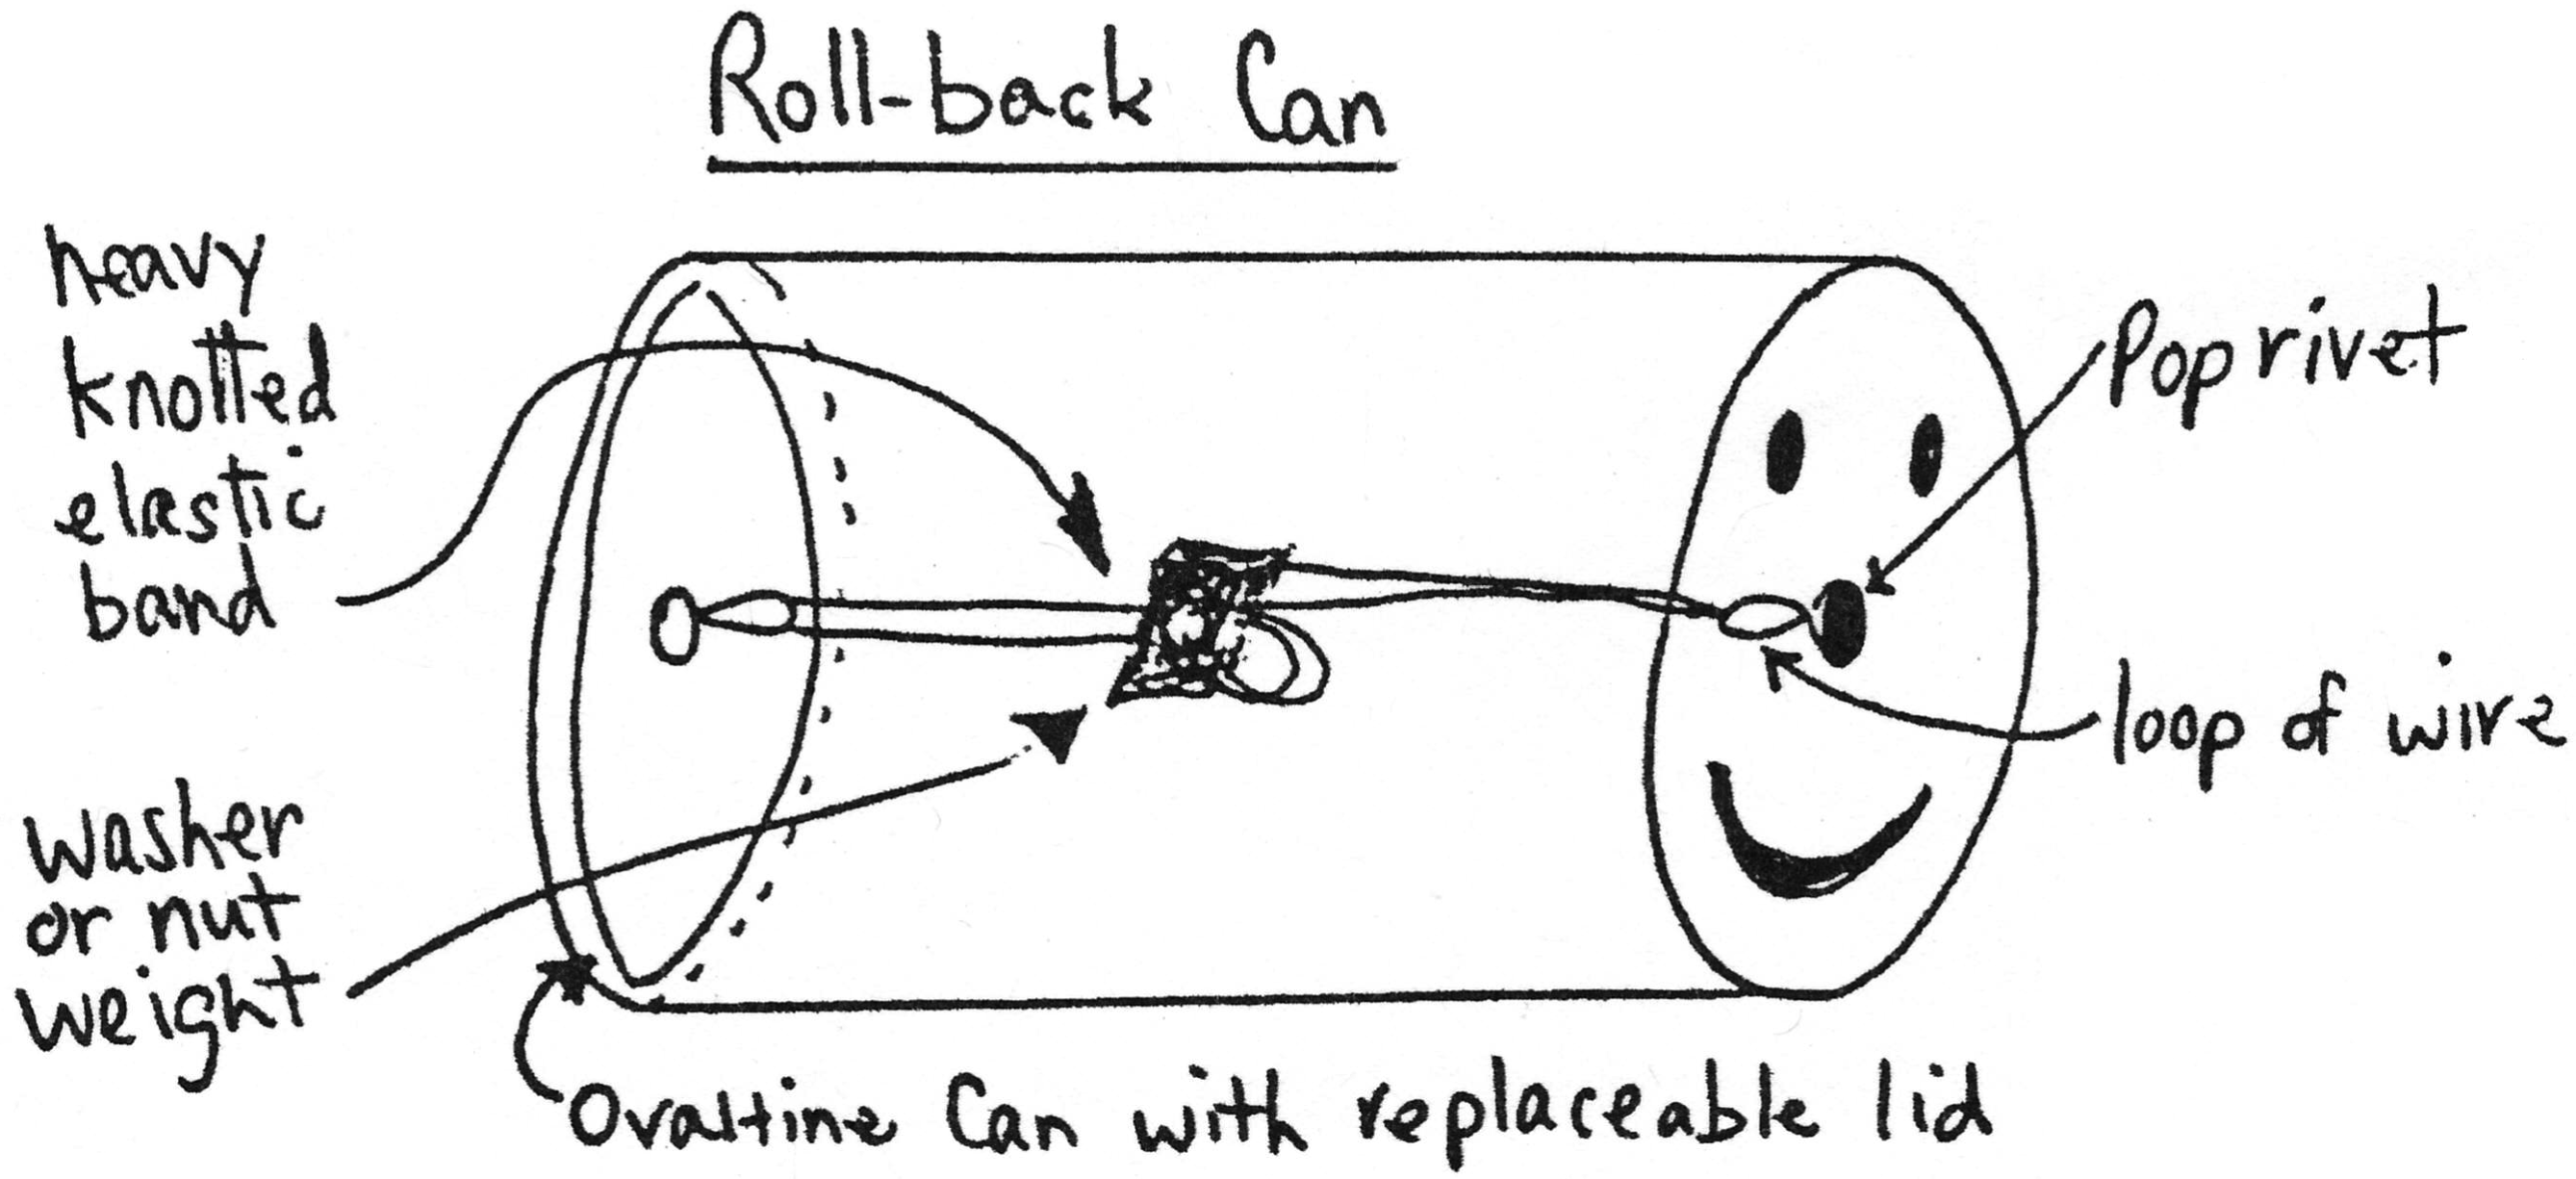 Rollback-Can-1